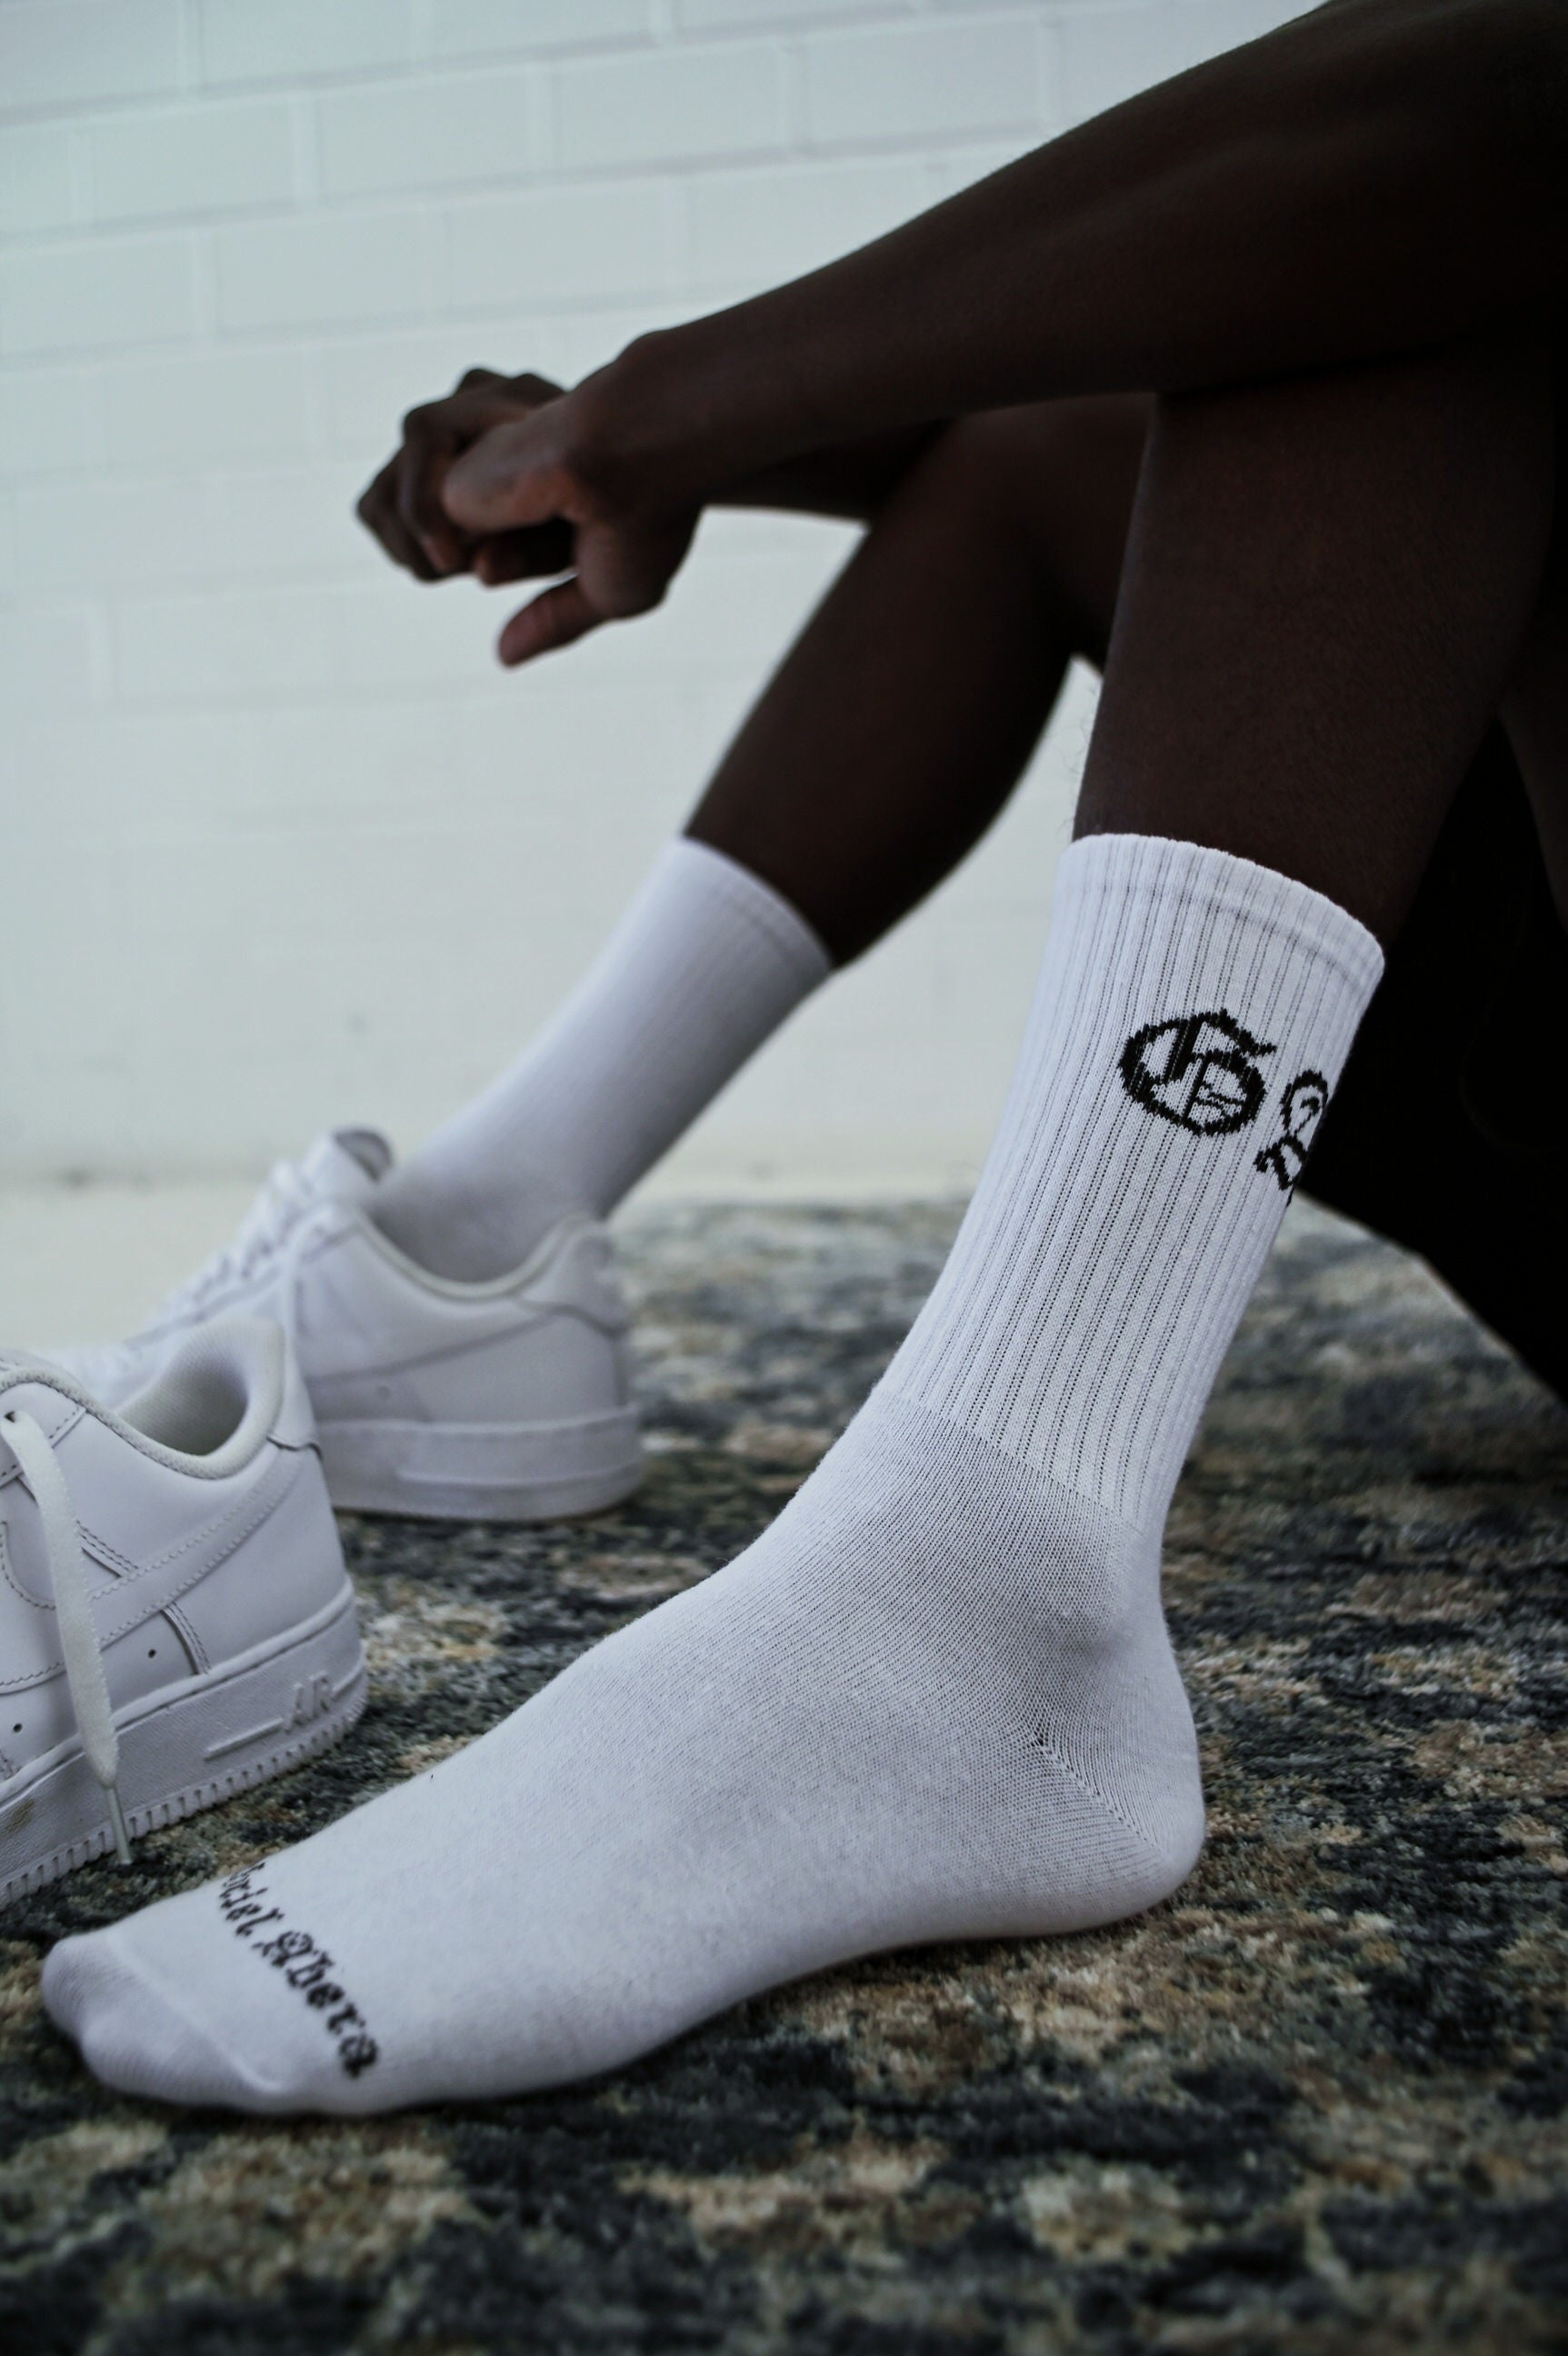 Model wearing a pair of socks with capital letters GA in black and white